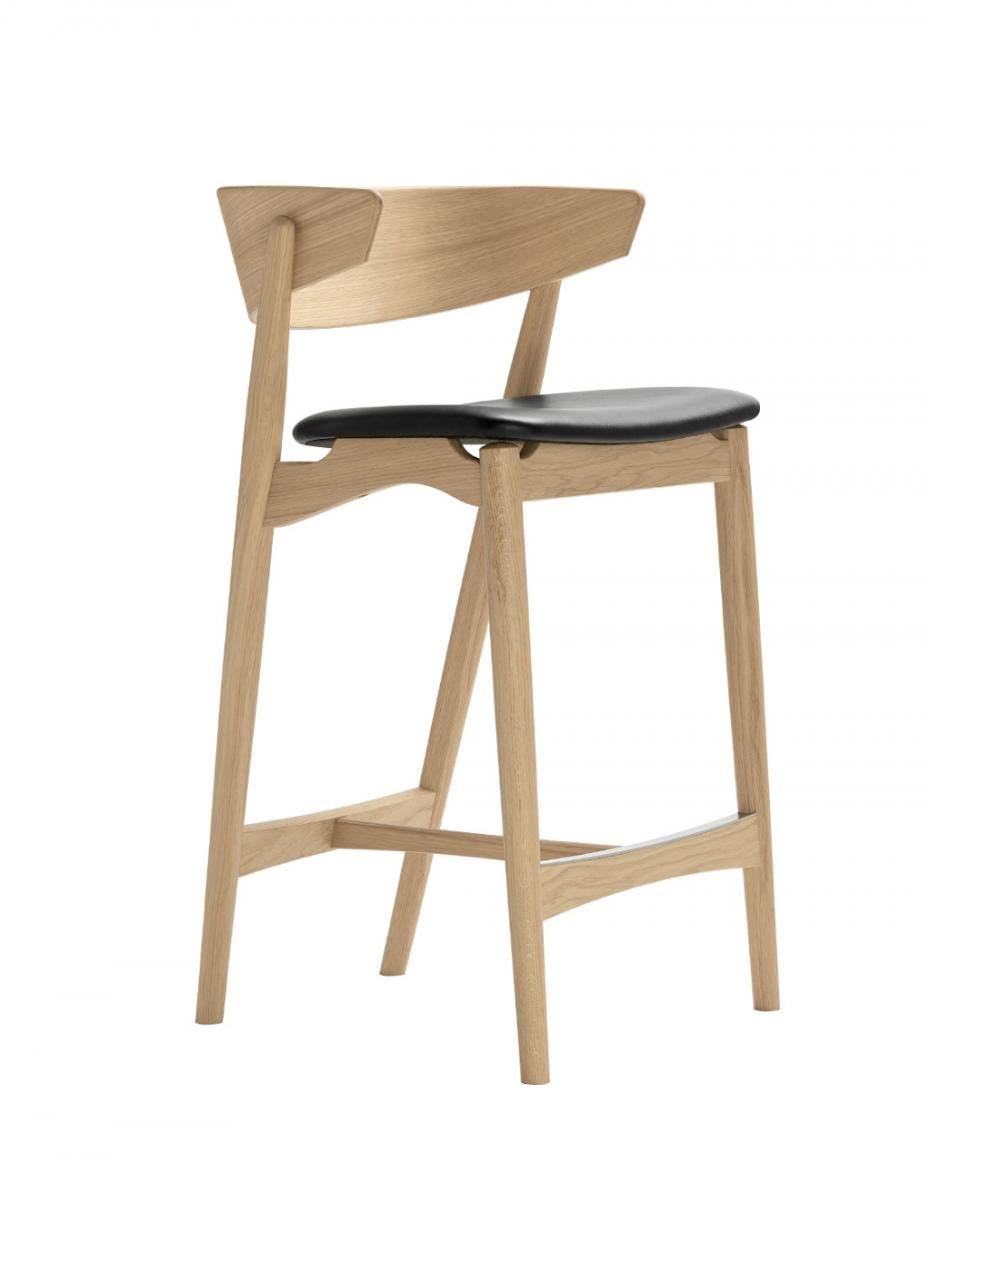 Sibast No 7 Stool With Back Rest Oak Soap Black Leather Kitchen Counter Stool 65cm Light Wood Designer Furniture From Holloways Of Ludlow